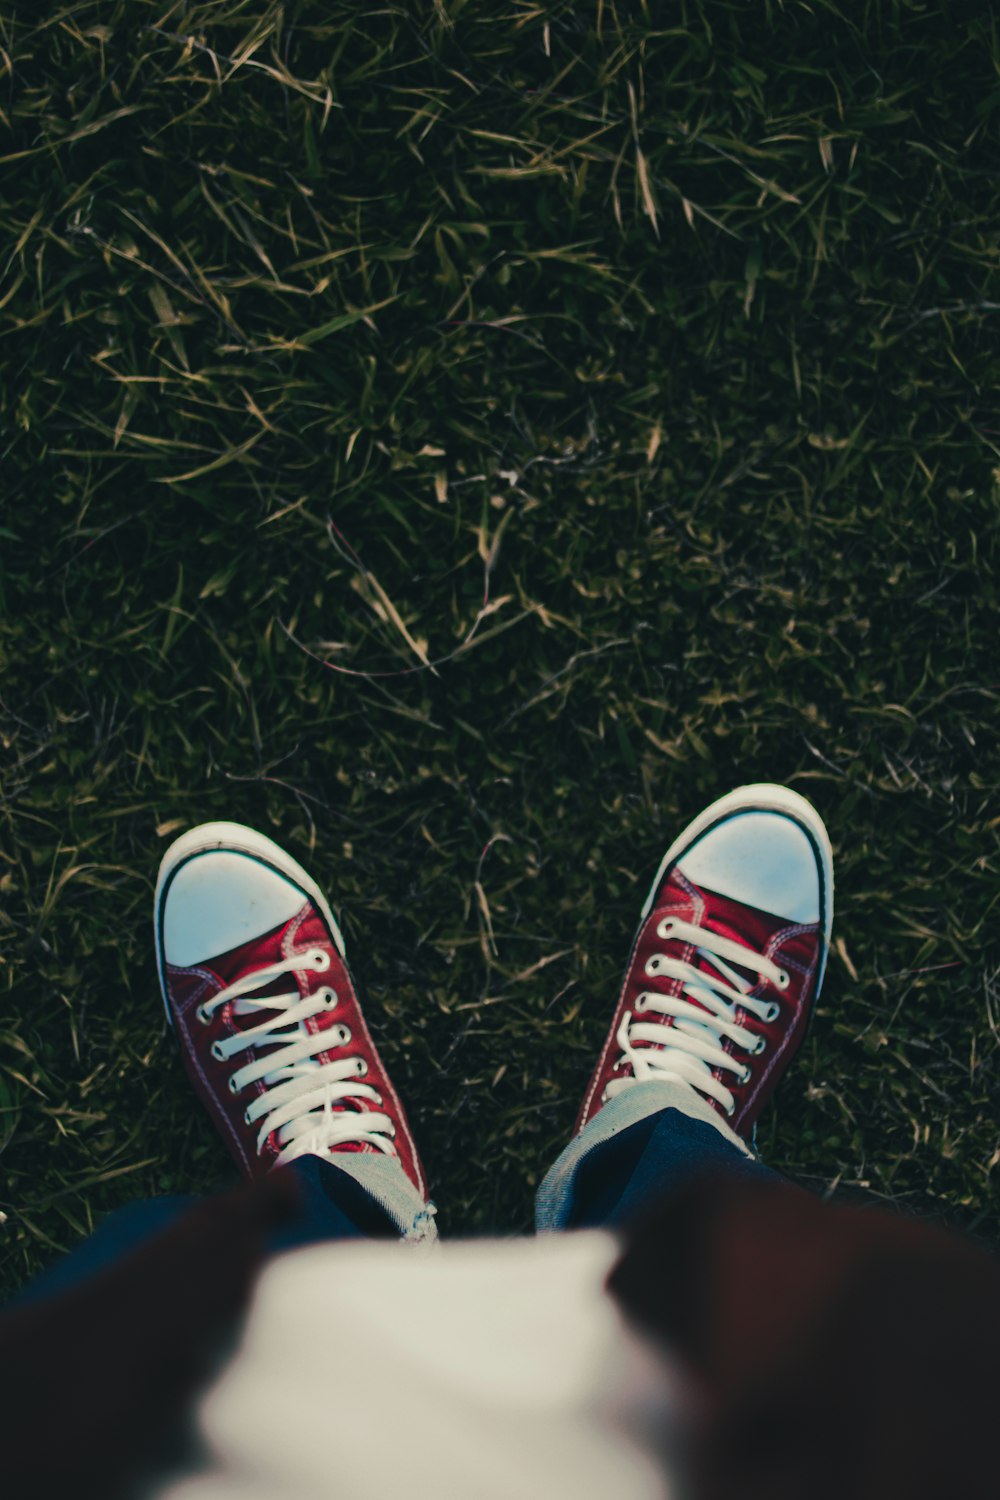 a person wearing red and white sneakers standing in the grass